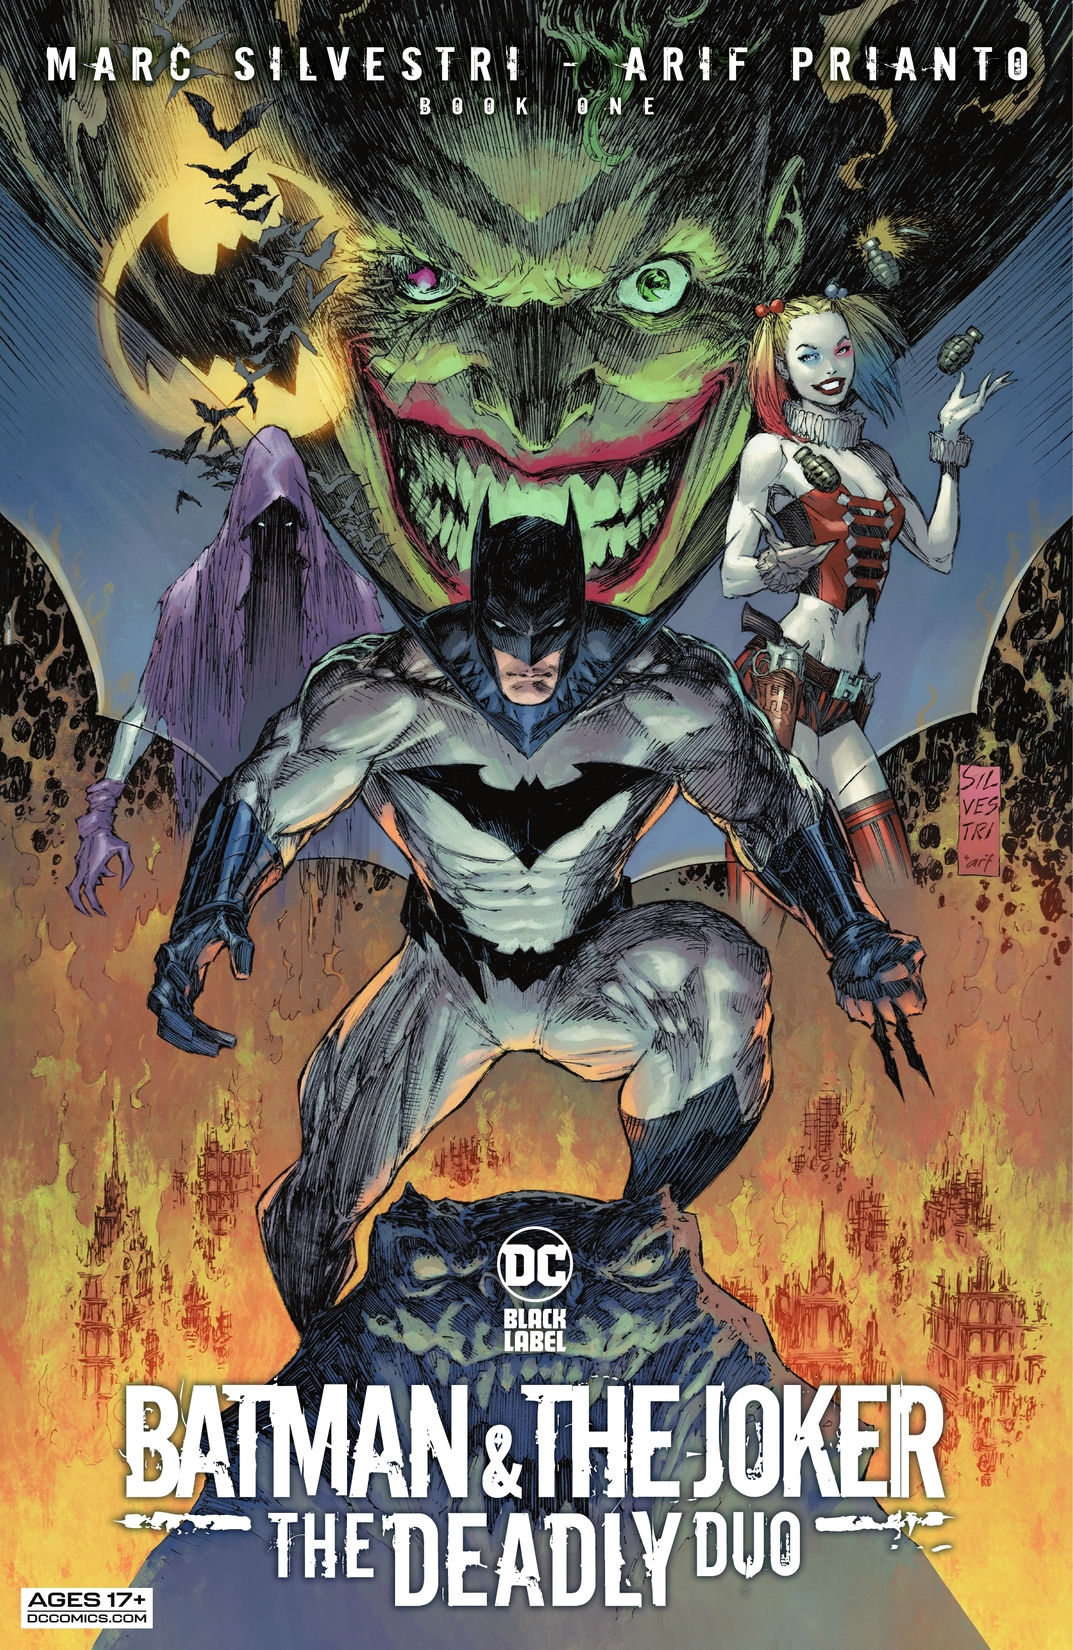 Batman & The Joker: The Deadly Duo #1 preview images